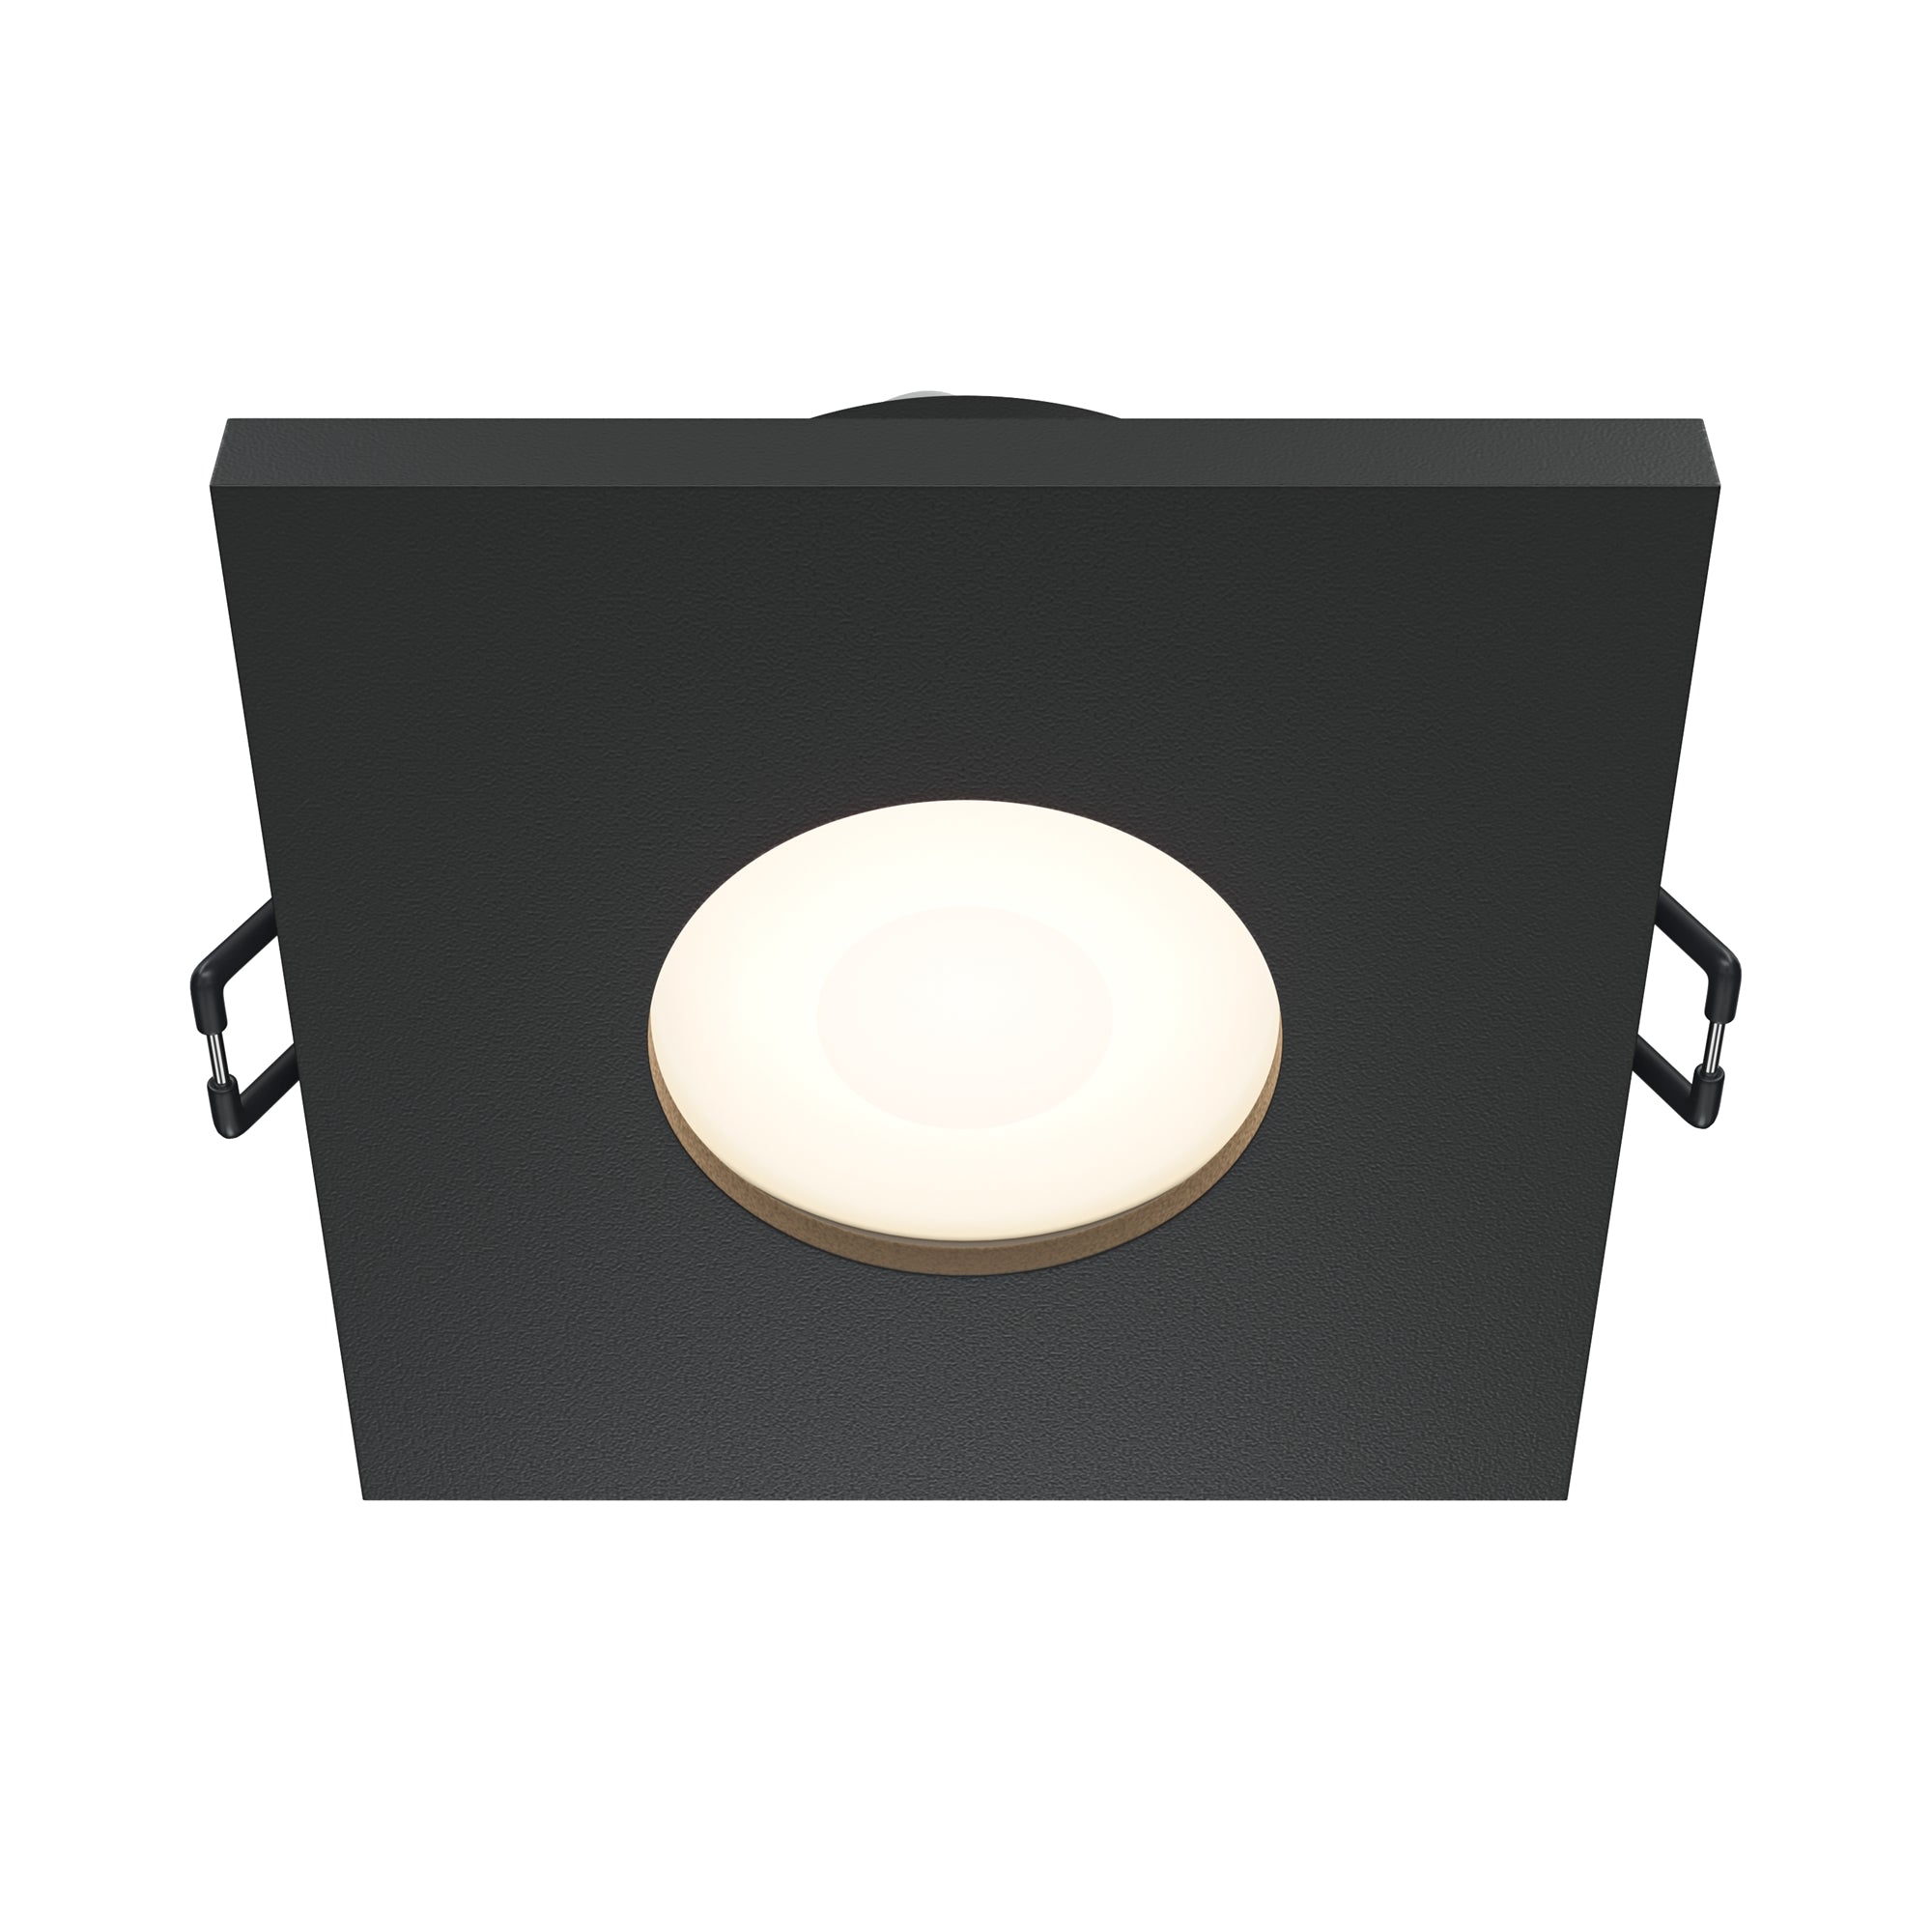 Stark Recessed Ceiling Light - Various Shapes & Finishes